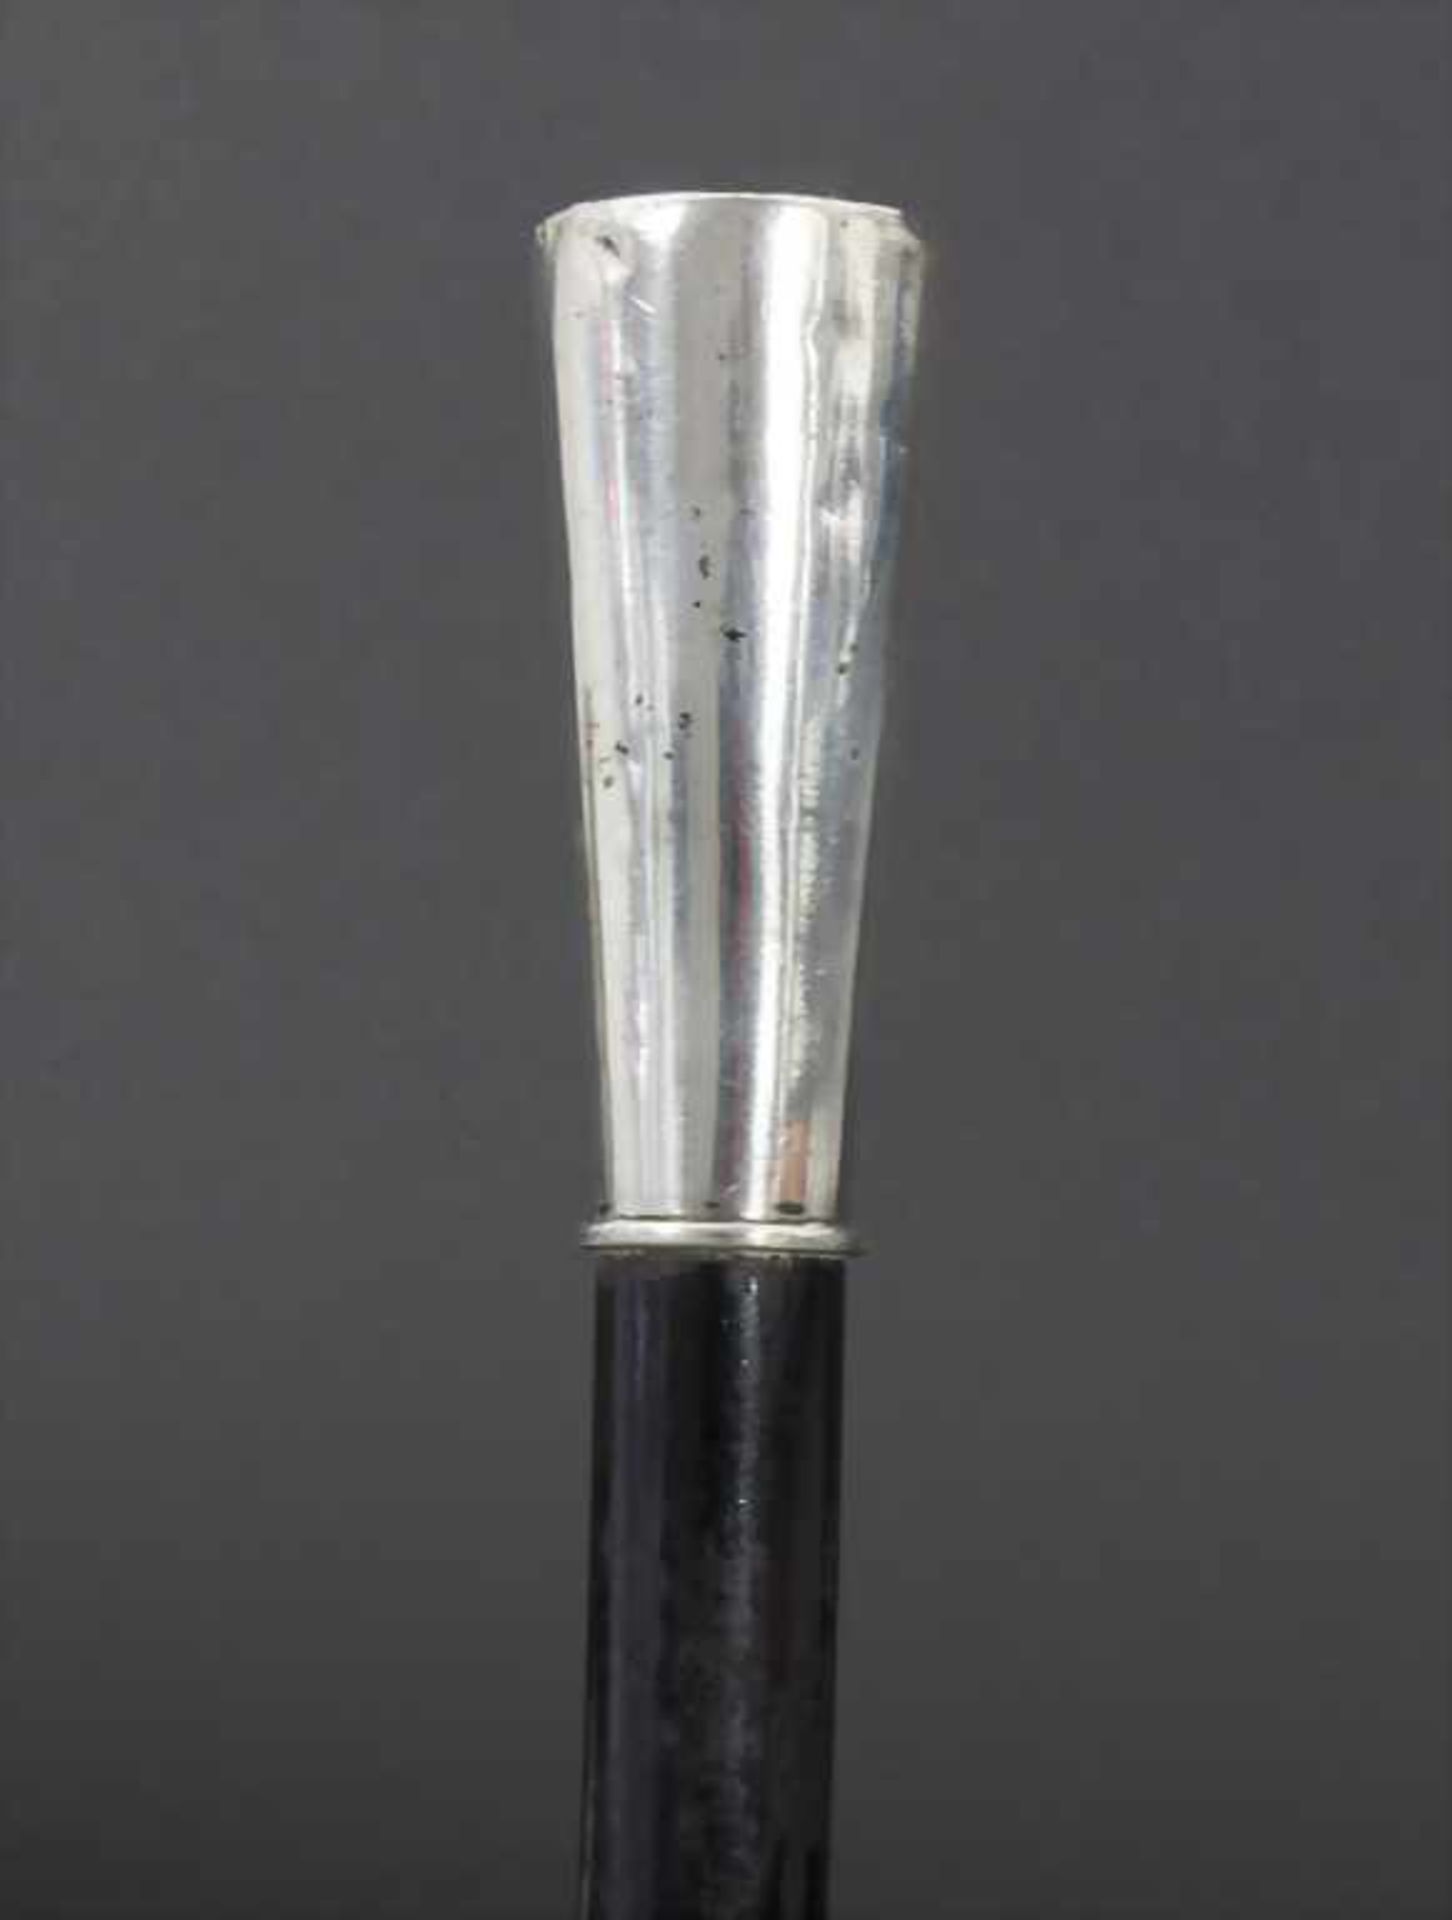 Gehstock mit Silberknauf / A cane with silver handle, Ende 19. Jh.Material: Hartholz, ebonisiert (